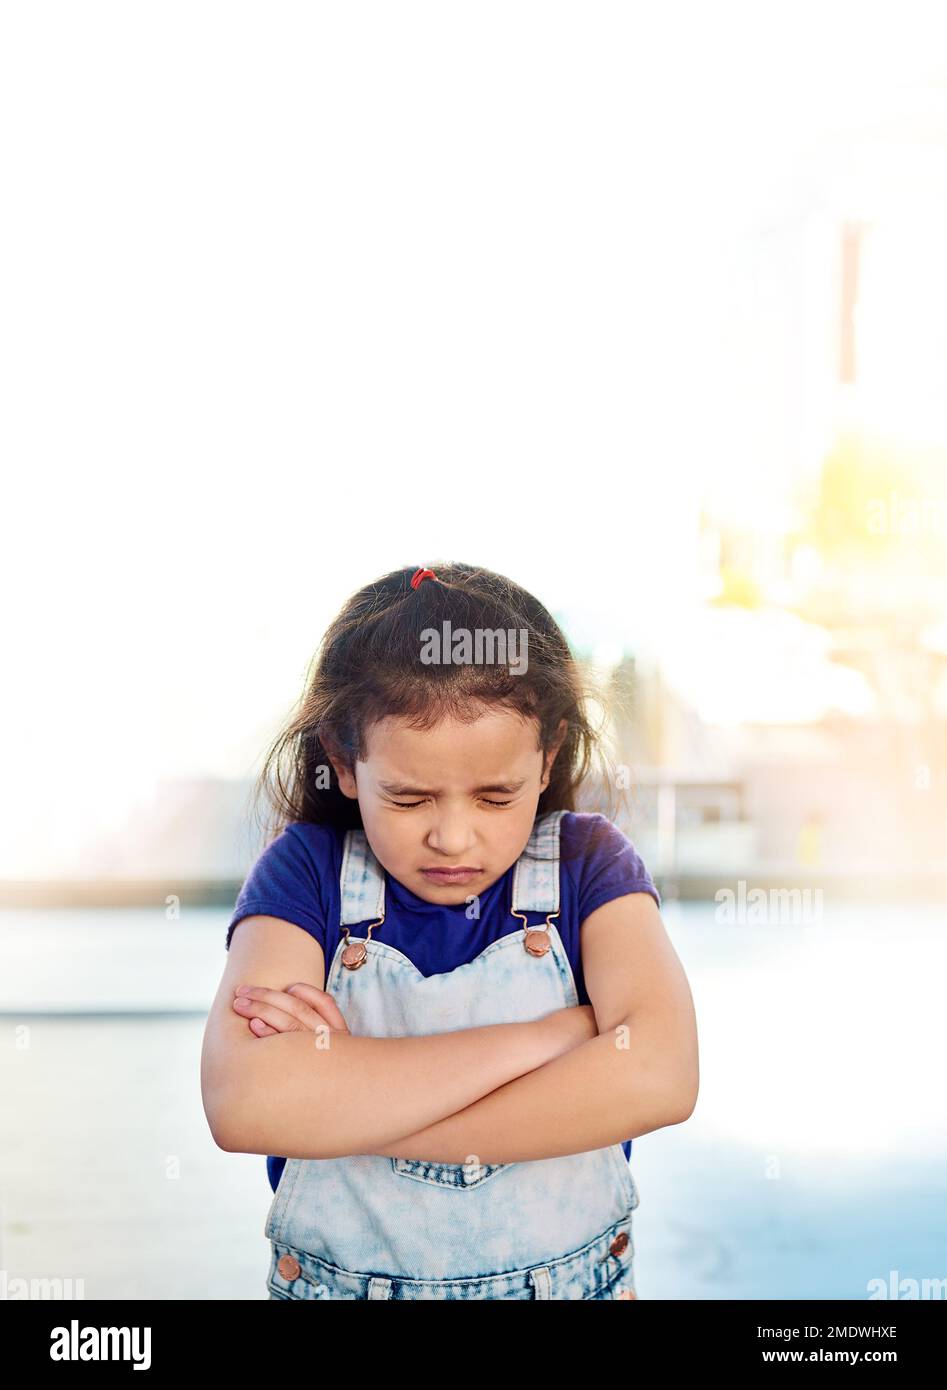 https://c8.alamy.com/comp/2MDWHXE/holding-back-tears-a-sad-little-girl-posing-eyes-closed-and-with-arms-folded-at-home-2MDWHXE.jpg